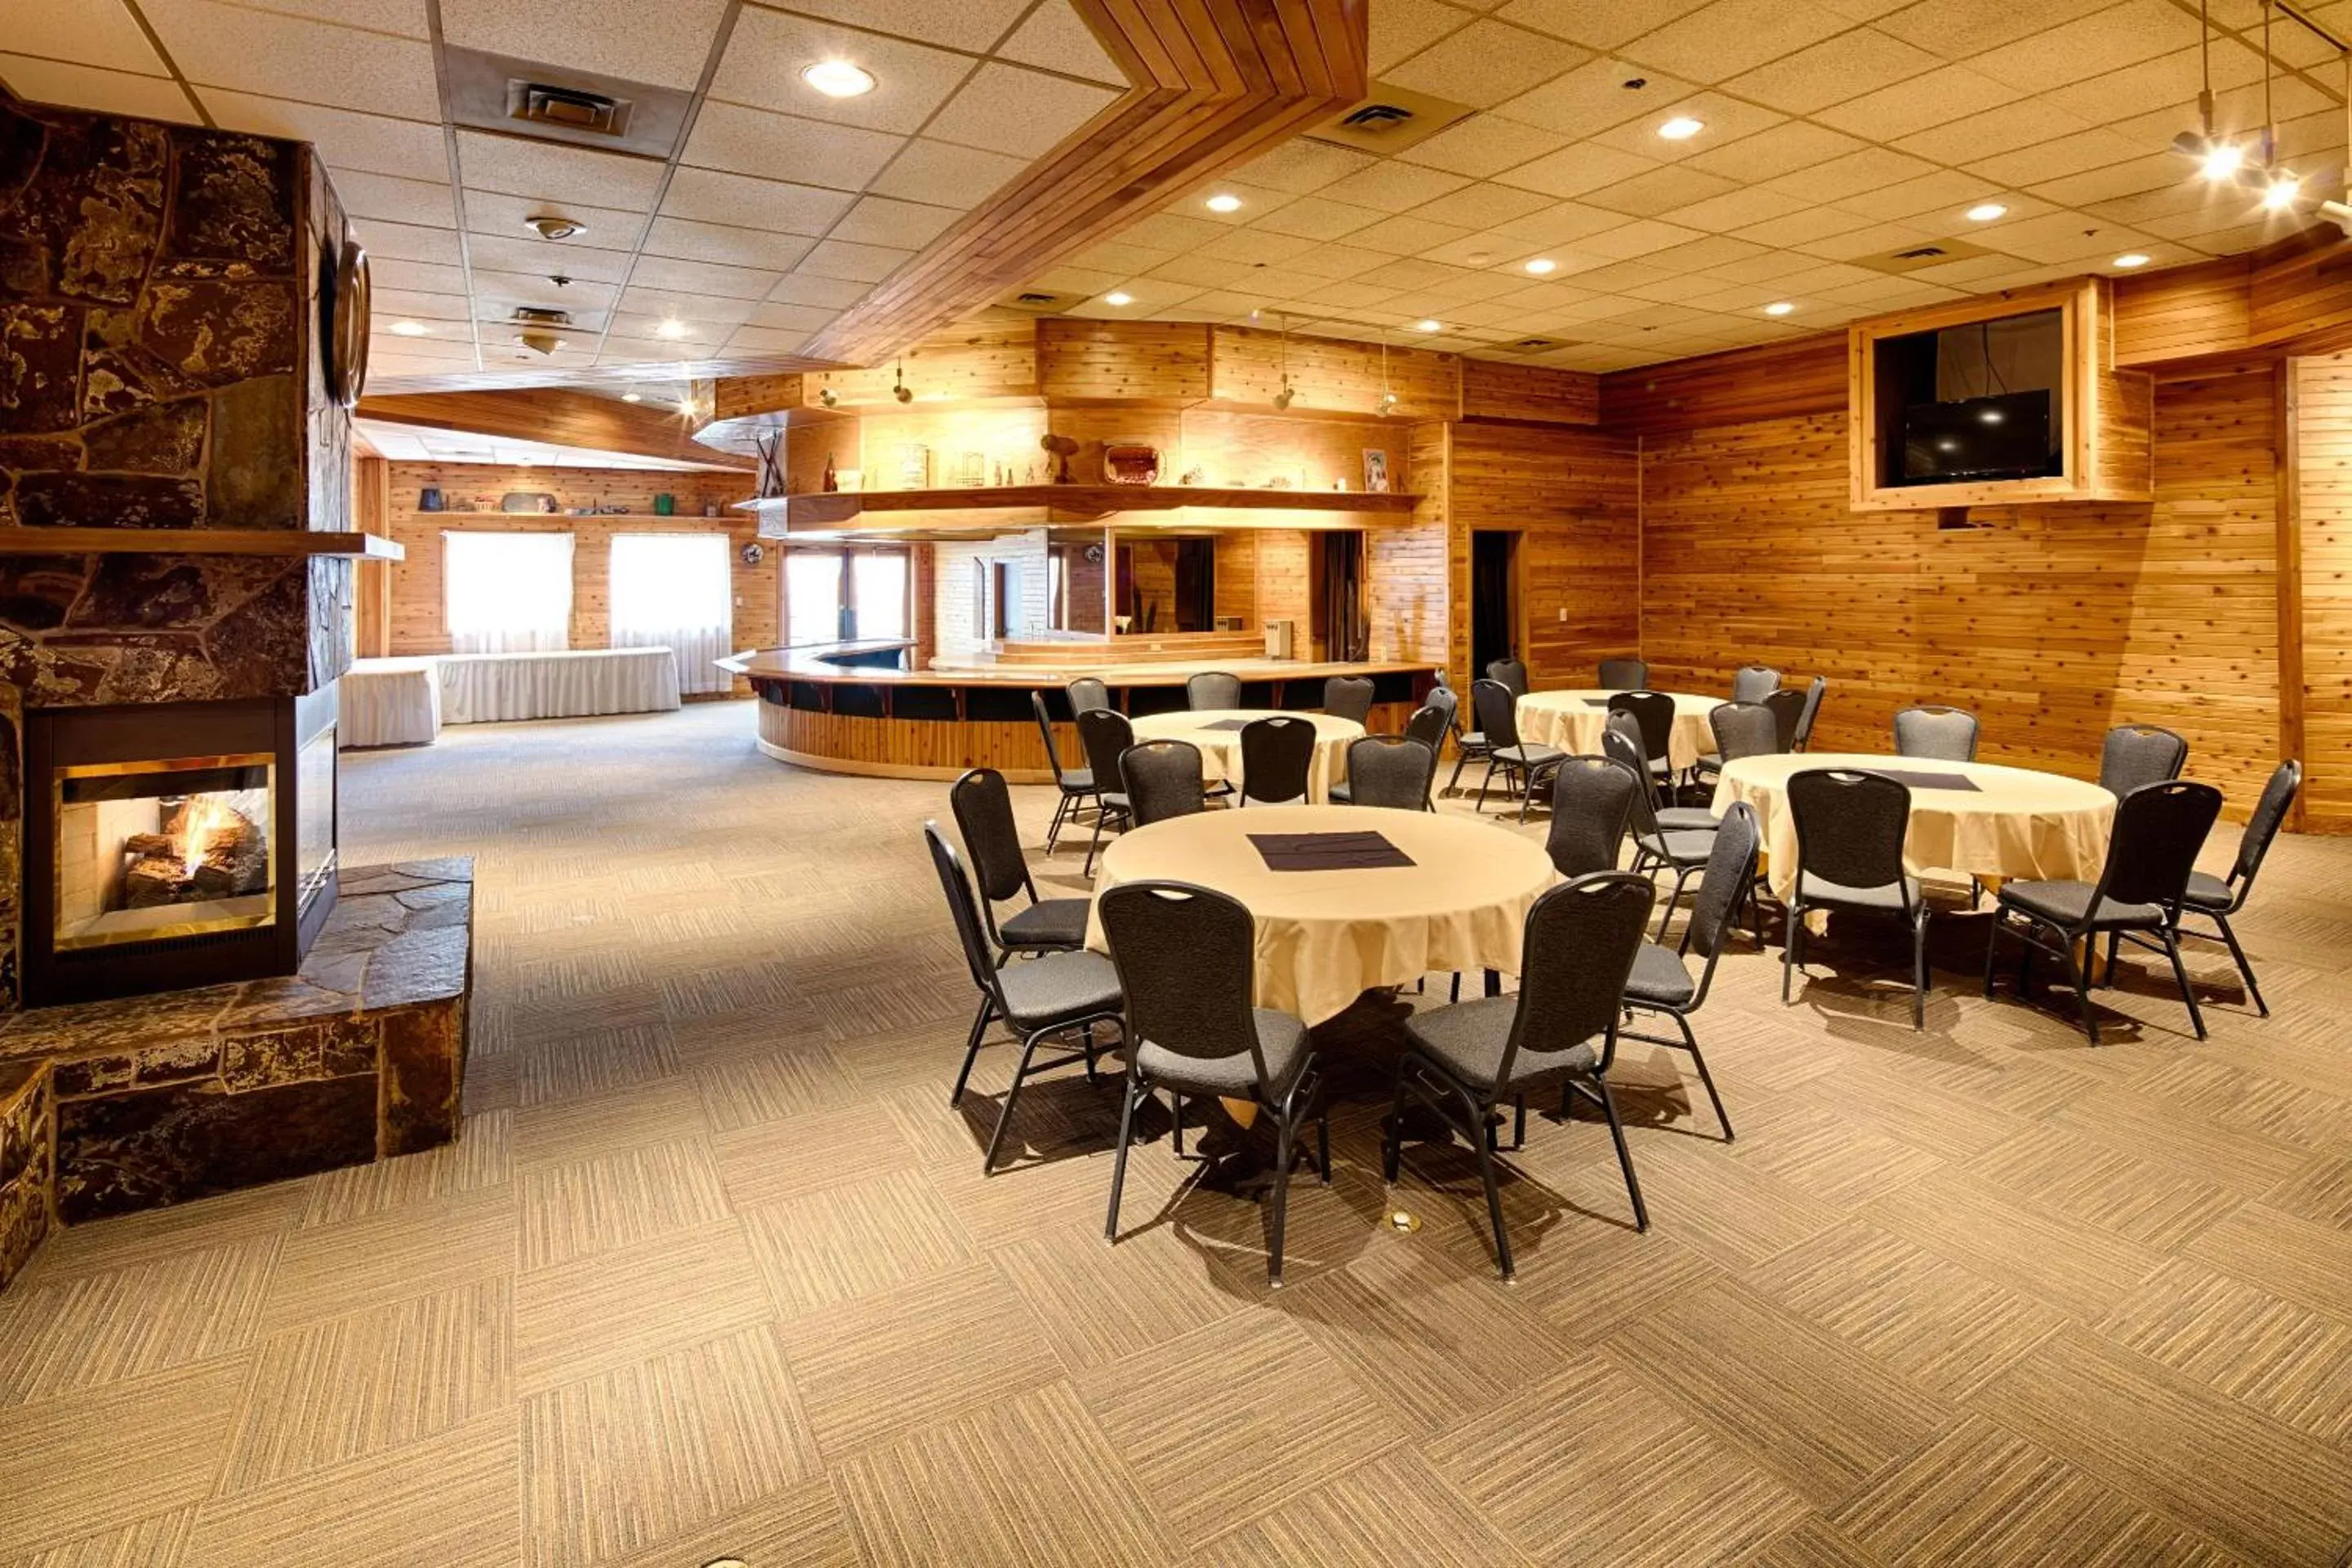 Banquet/Function facilities, Lounge/Bar in Red Lion Hotel Kalispell